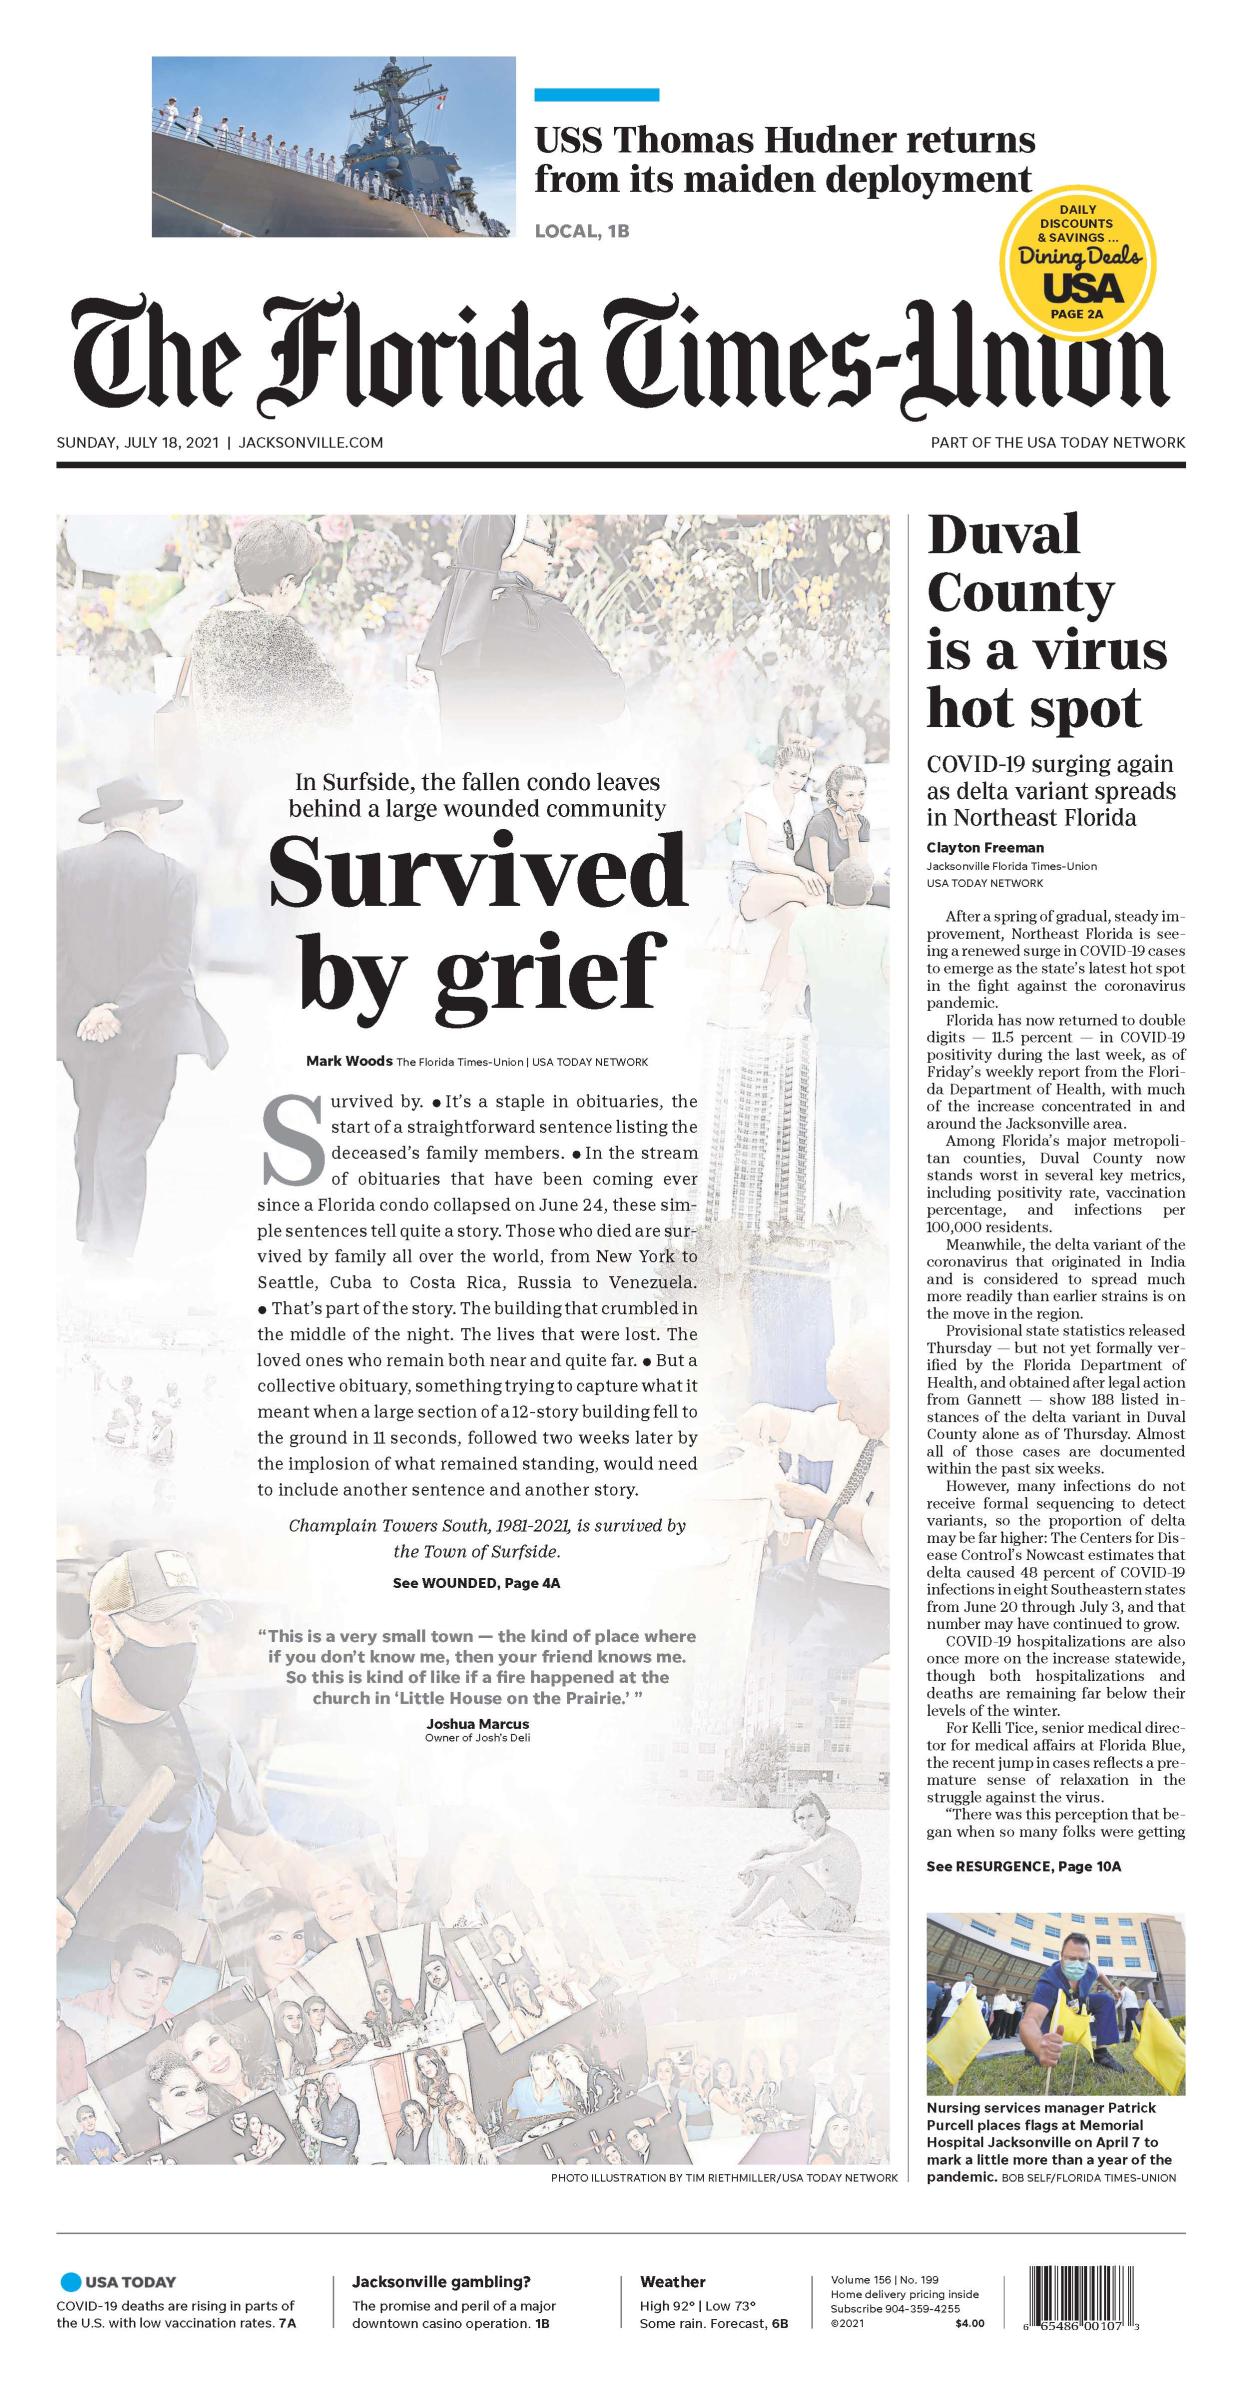 The front page of the July 18, 2021, edition of the Florida Times-Union, featuring Mark Woods' award-winning story on the Surfside community's collective grief in the wake of the deadly Champlain Towers condo collapse.